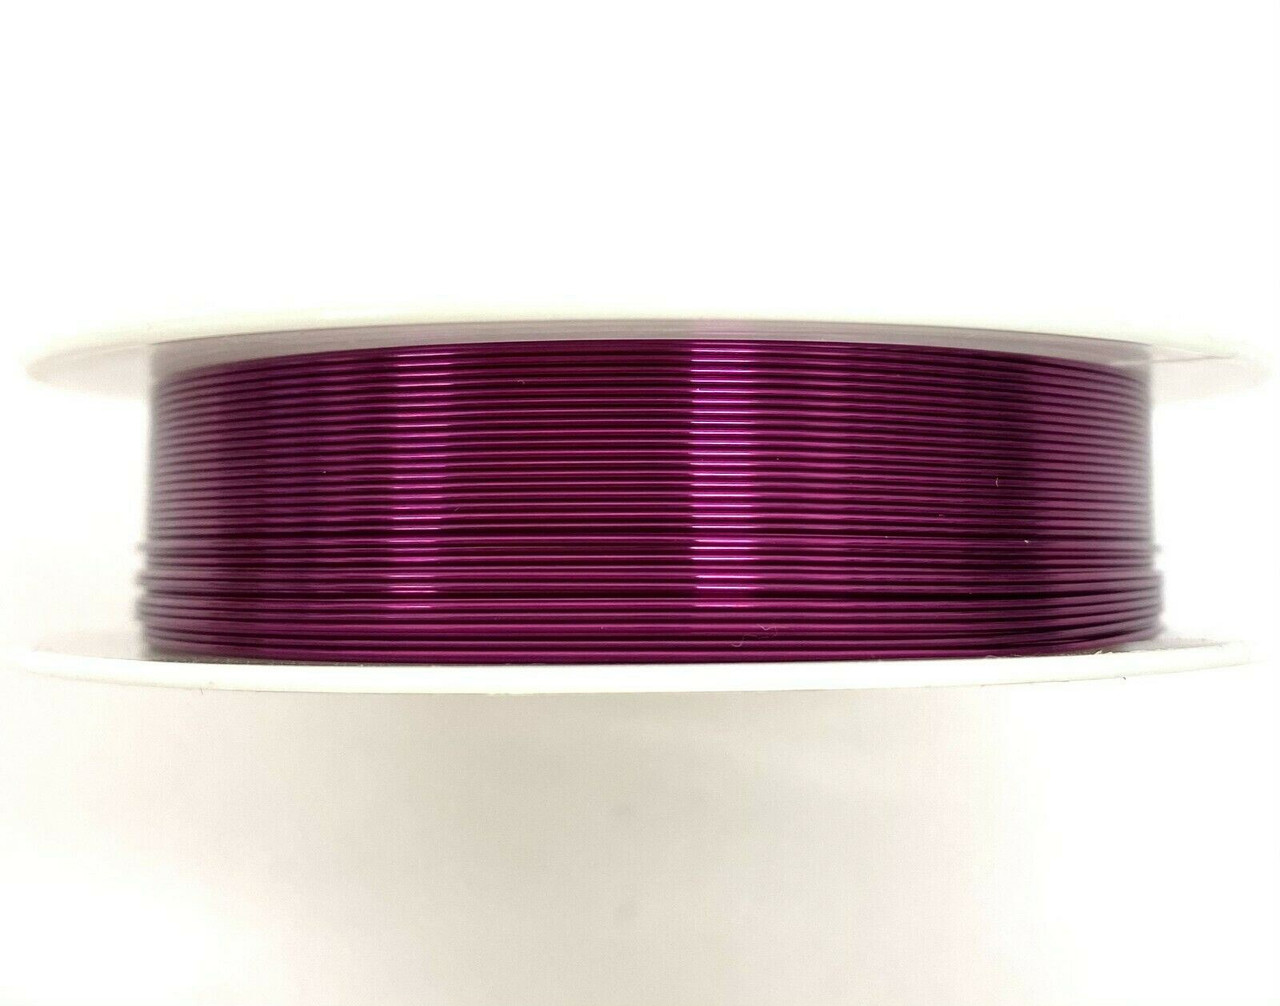 Roll of Copper Wire, 0.4mm thickness, PLUM colour, approx 10m length